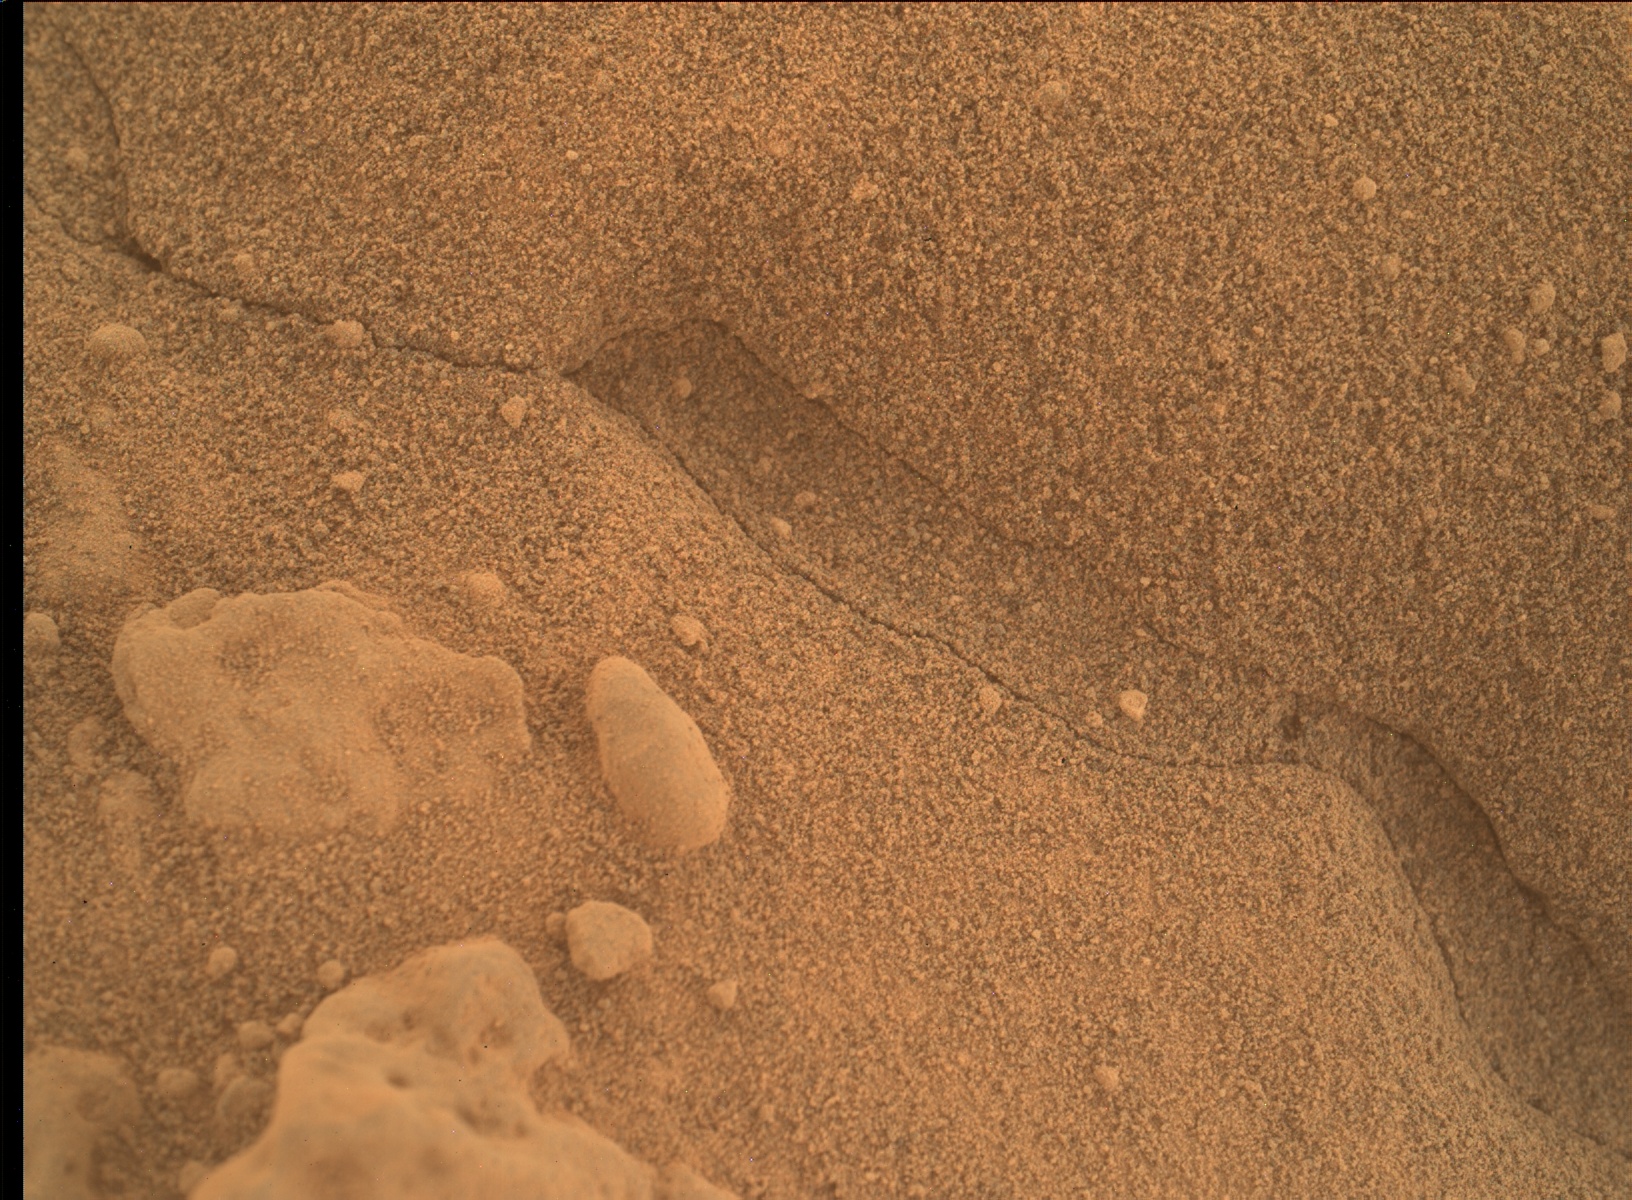 Nasa's Mars rover Curiosity acquired this image using its Mars Hand Lens Imager (MAHLI) on Sol 3730